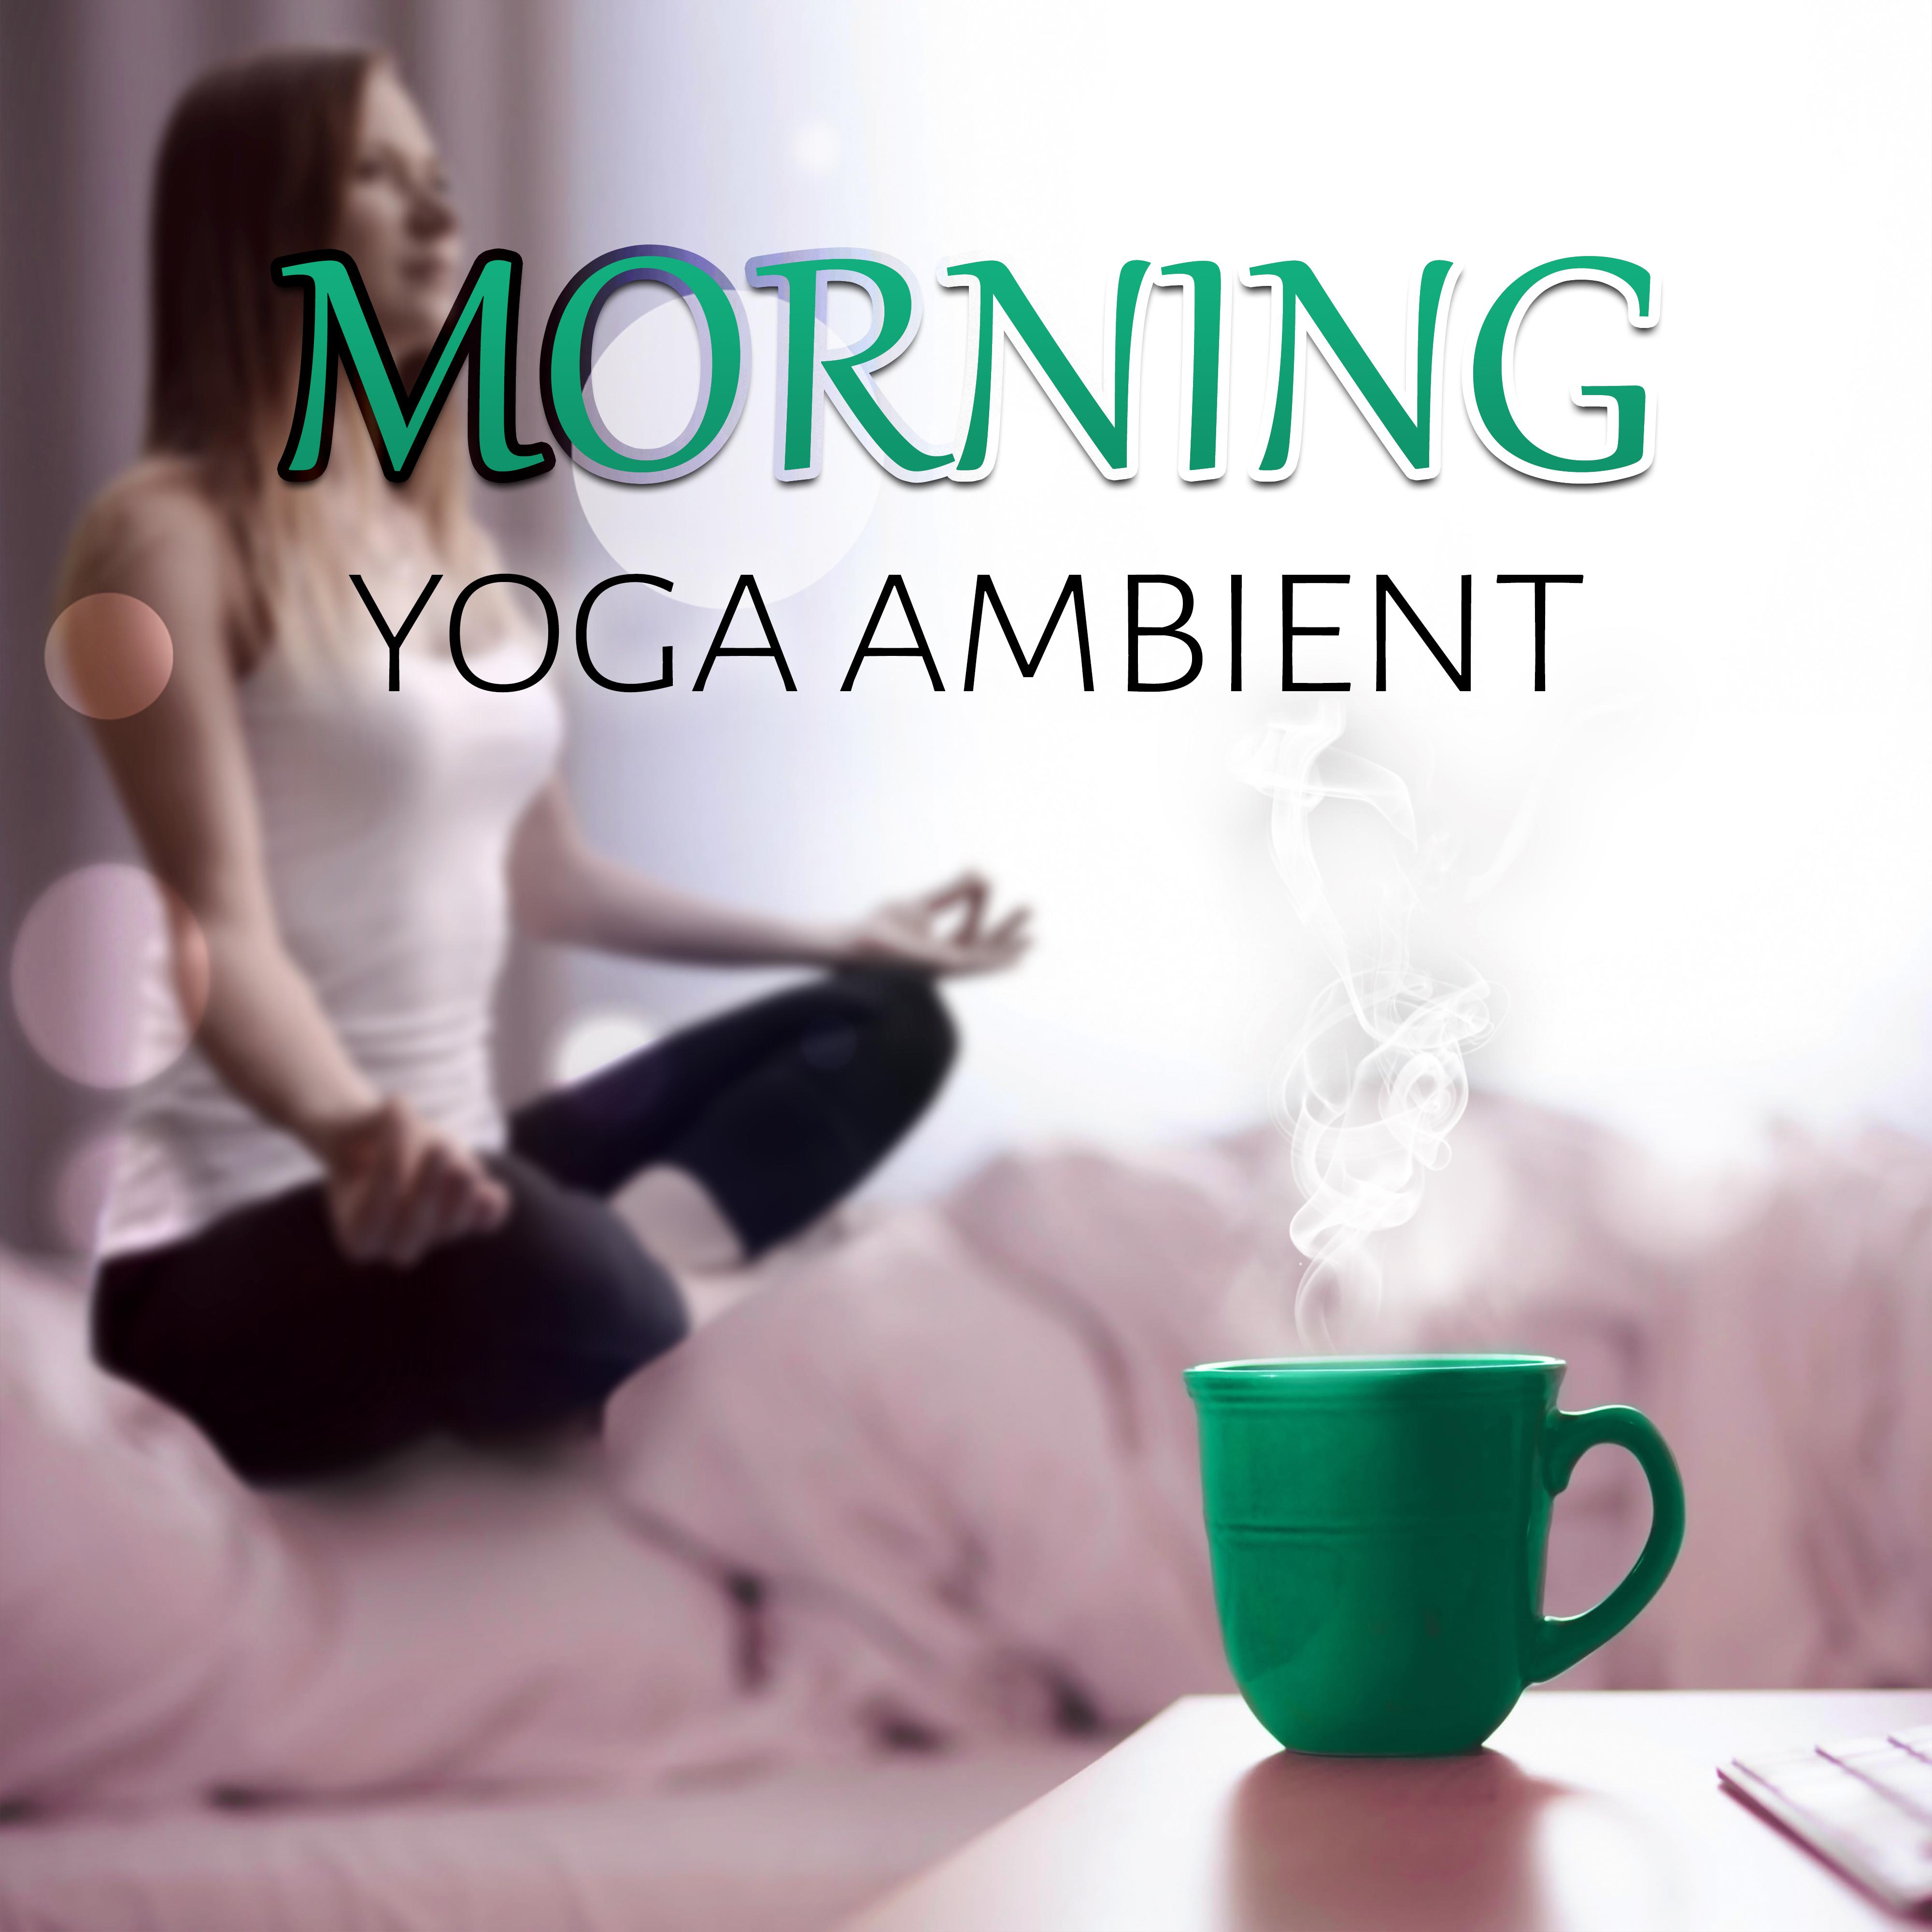 Morning Yoga  Ambient  Meditation, Early Morning, Calming Music, Relaxing New Age, Body Energy, Serenity Music, Nature Sounds